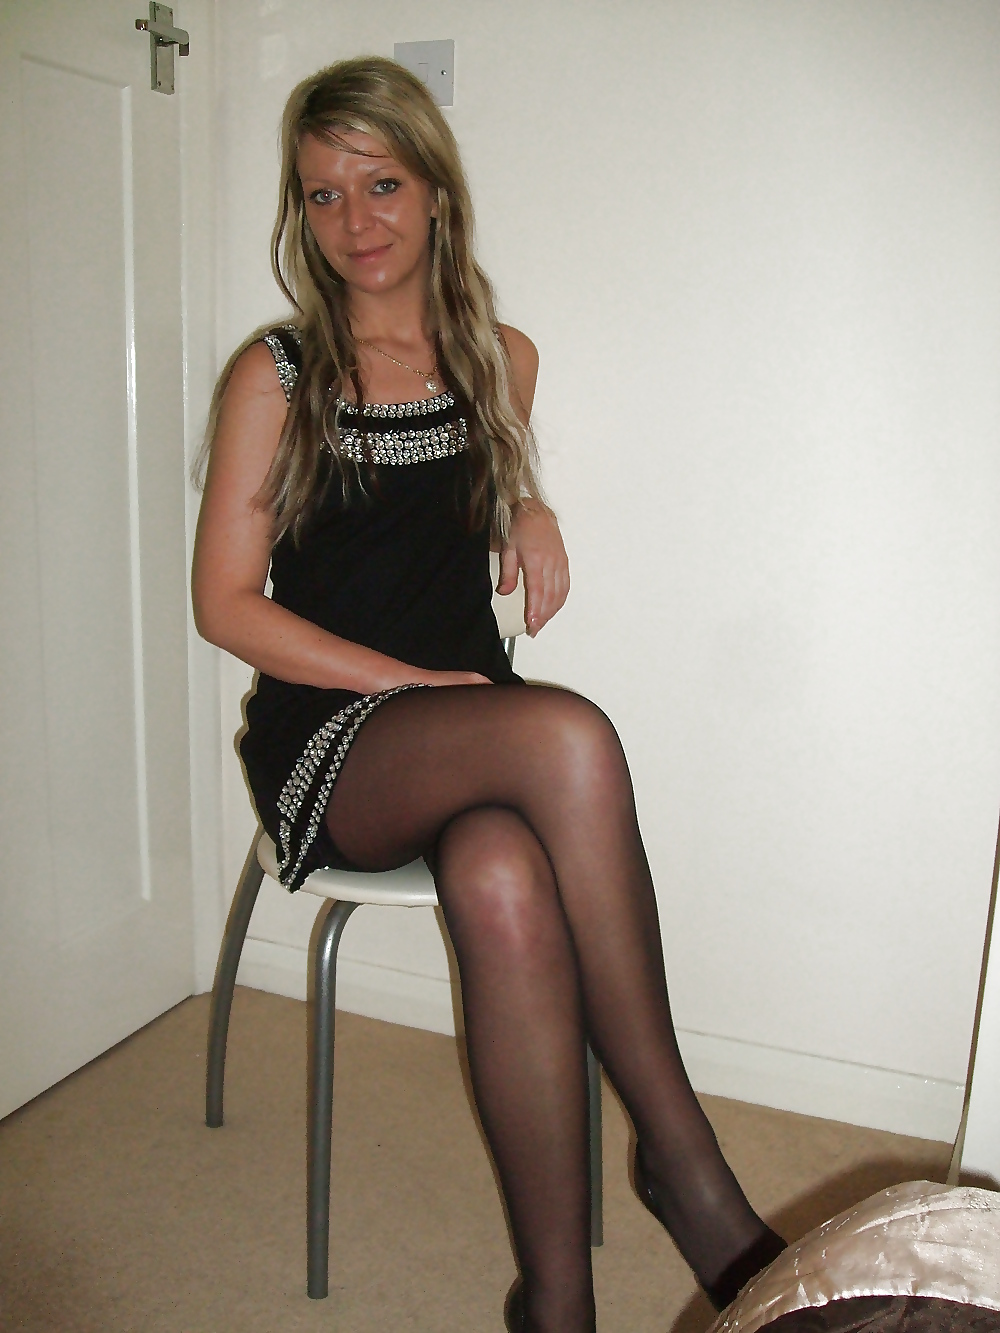 XXX Miniskirts and crossed legs. Part 2